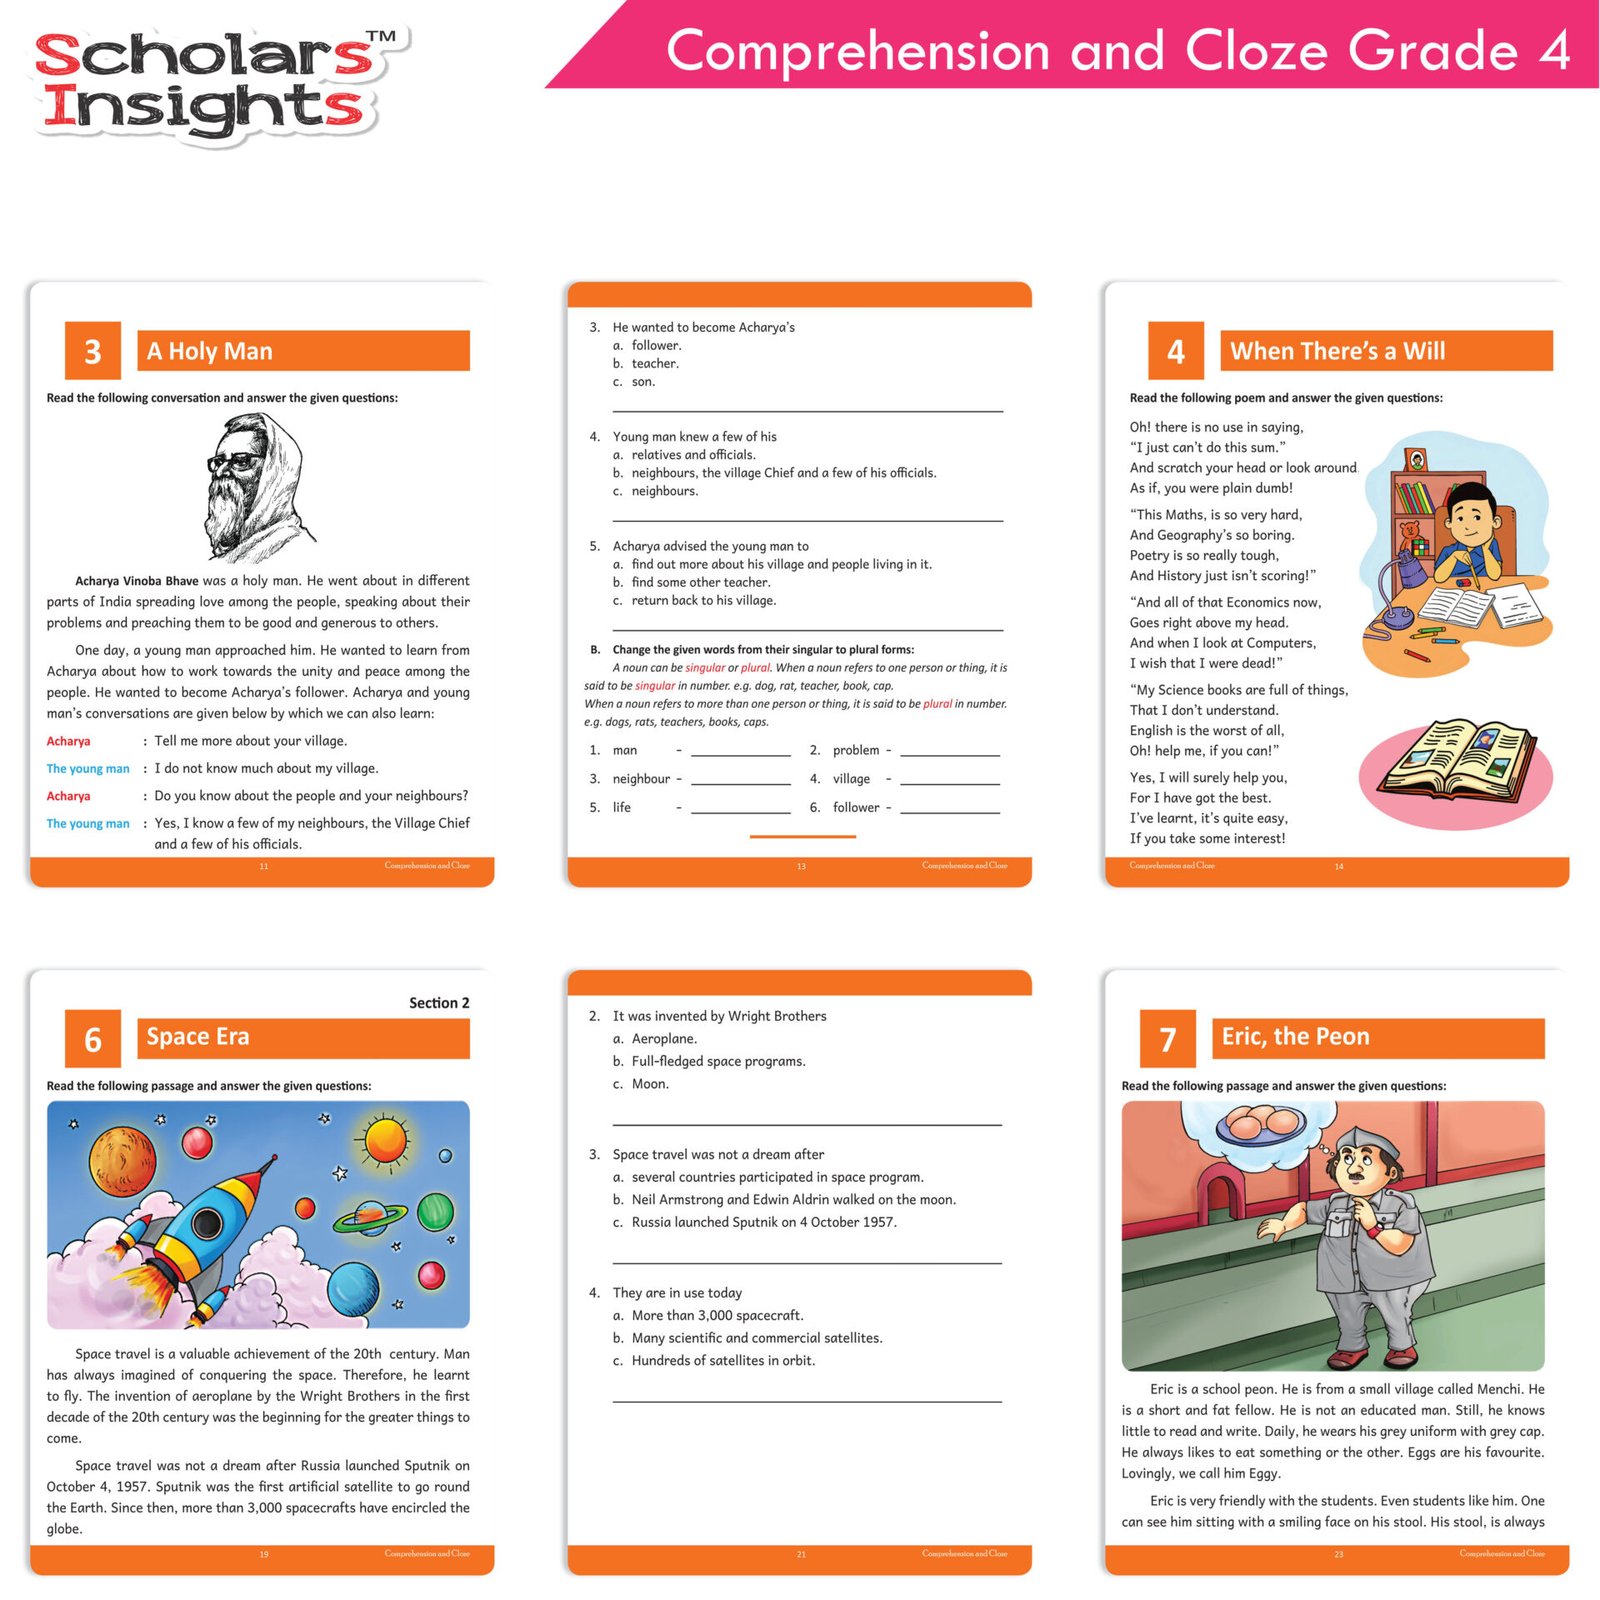 Scholars Insights Comprehension and Cloze Grade 4 4 1